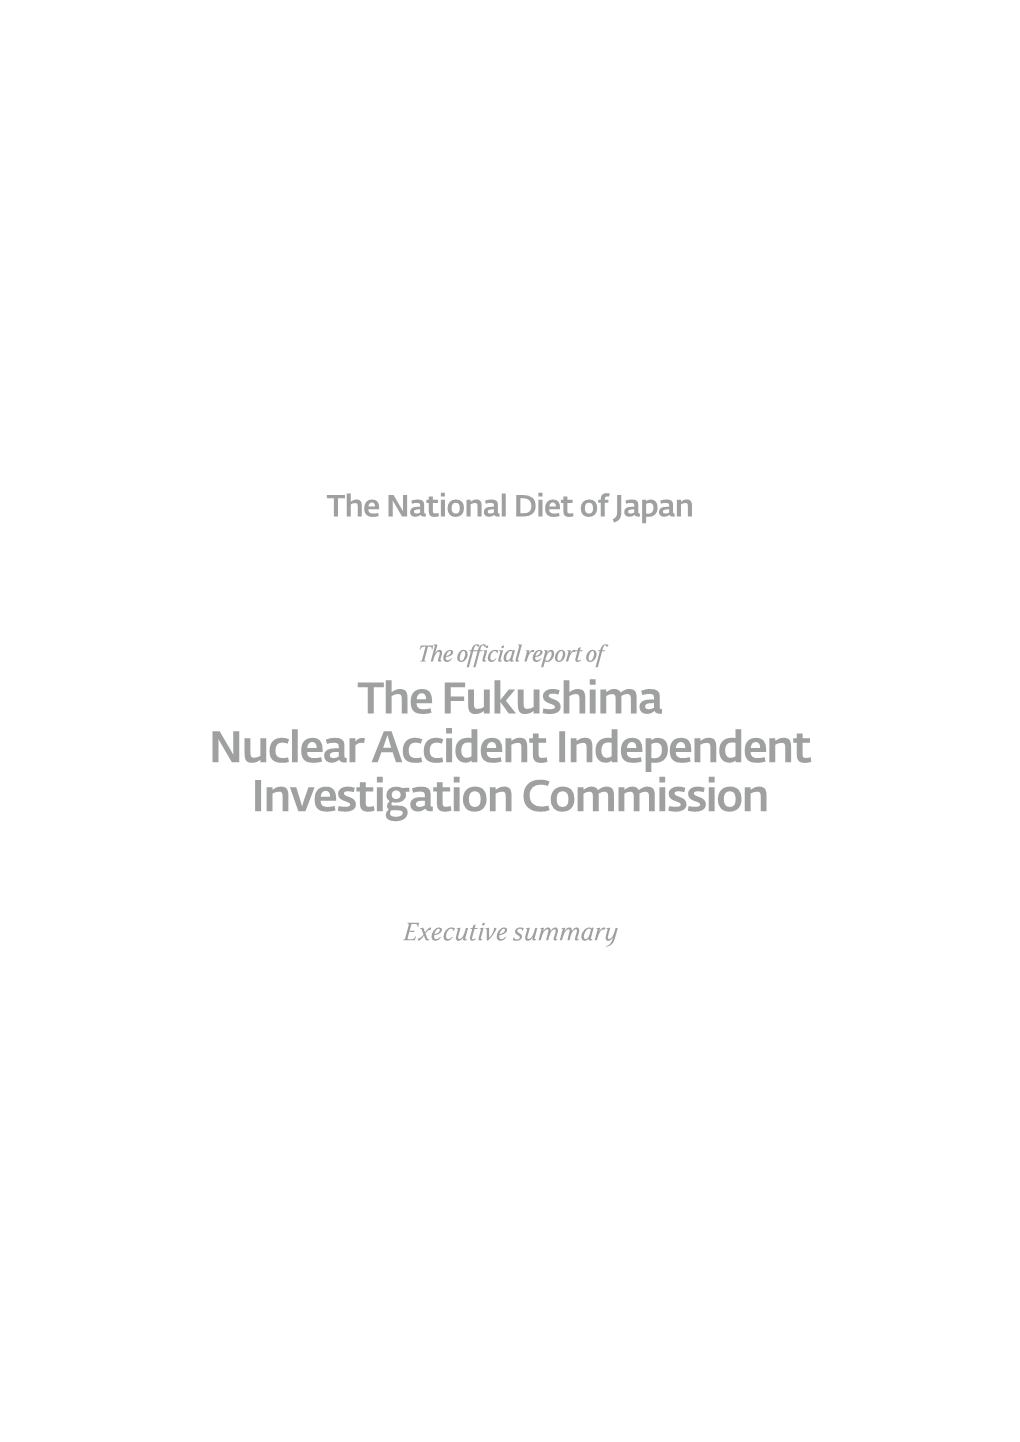 The Fukushima Nuclear Accident Independent Investigation Commission